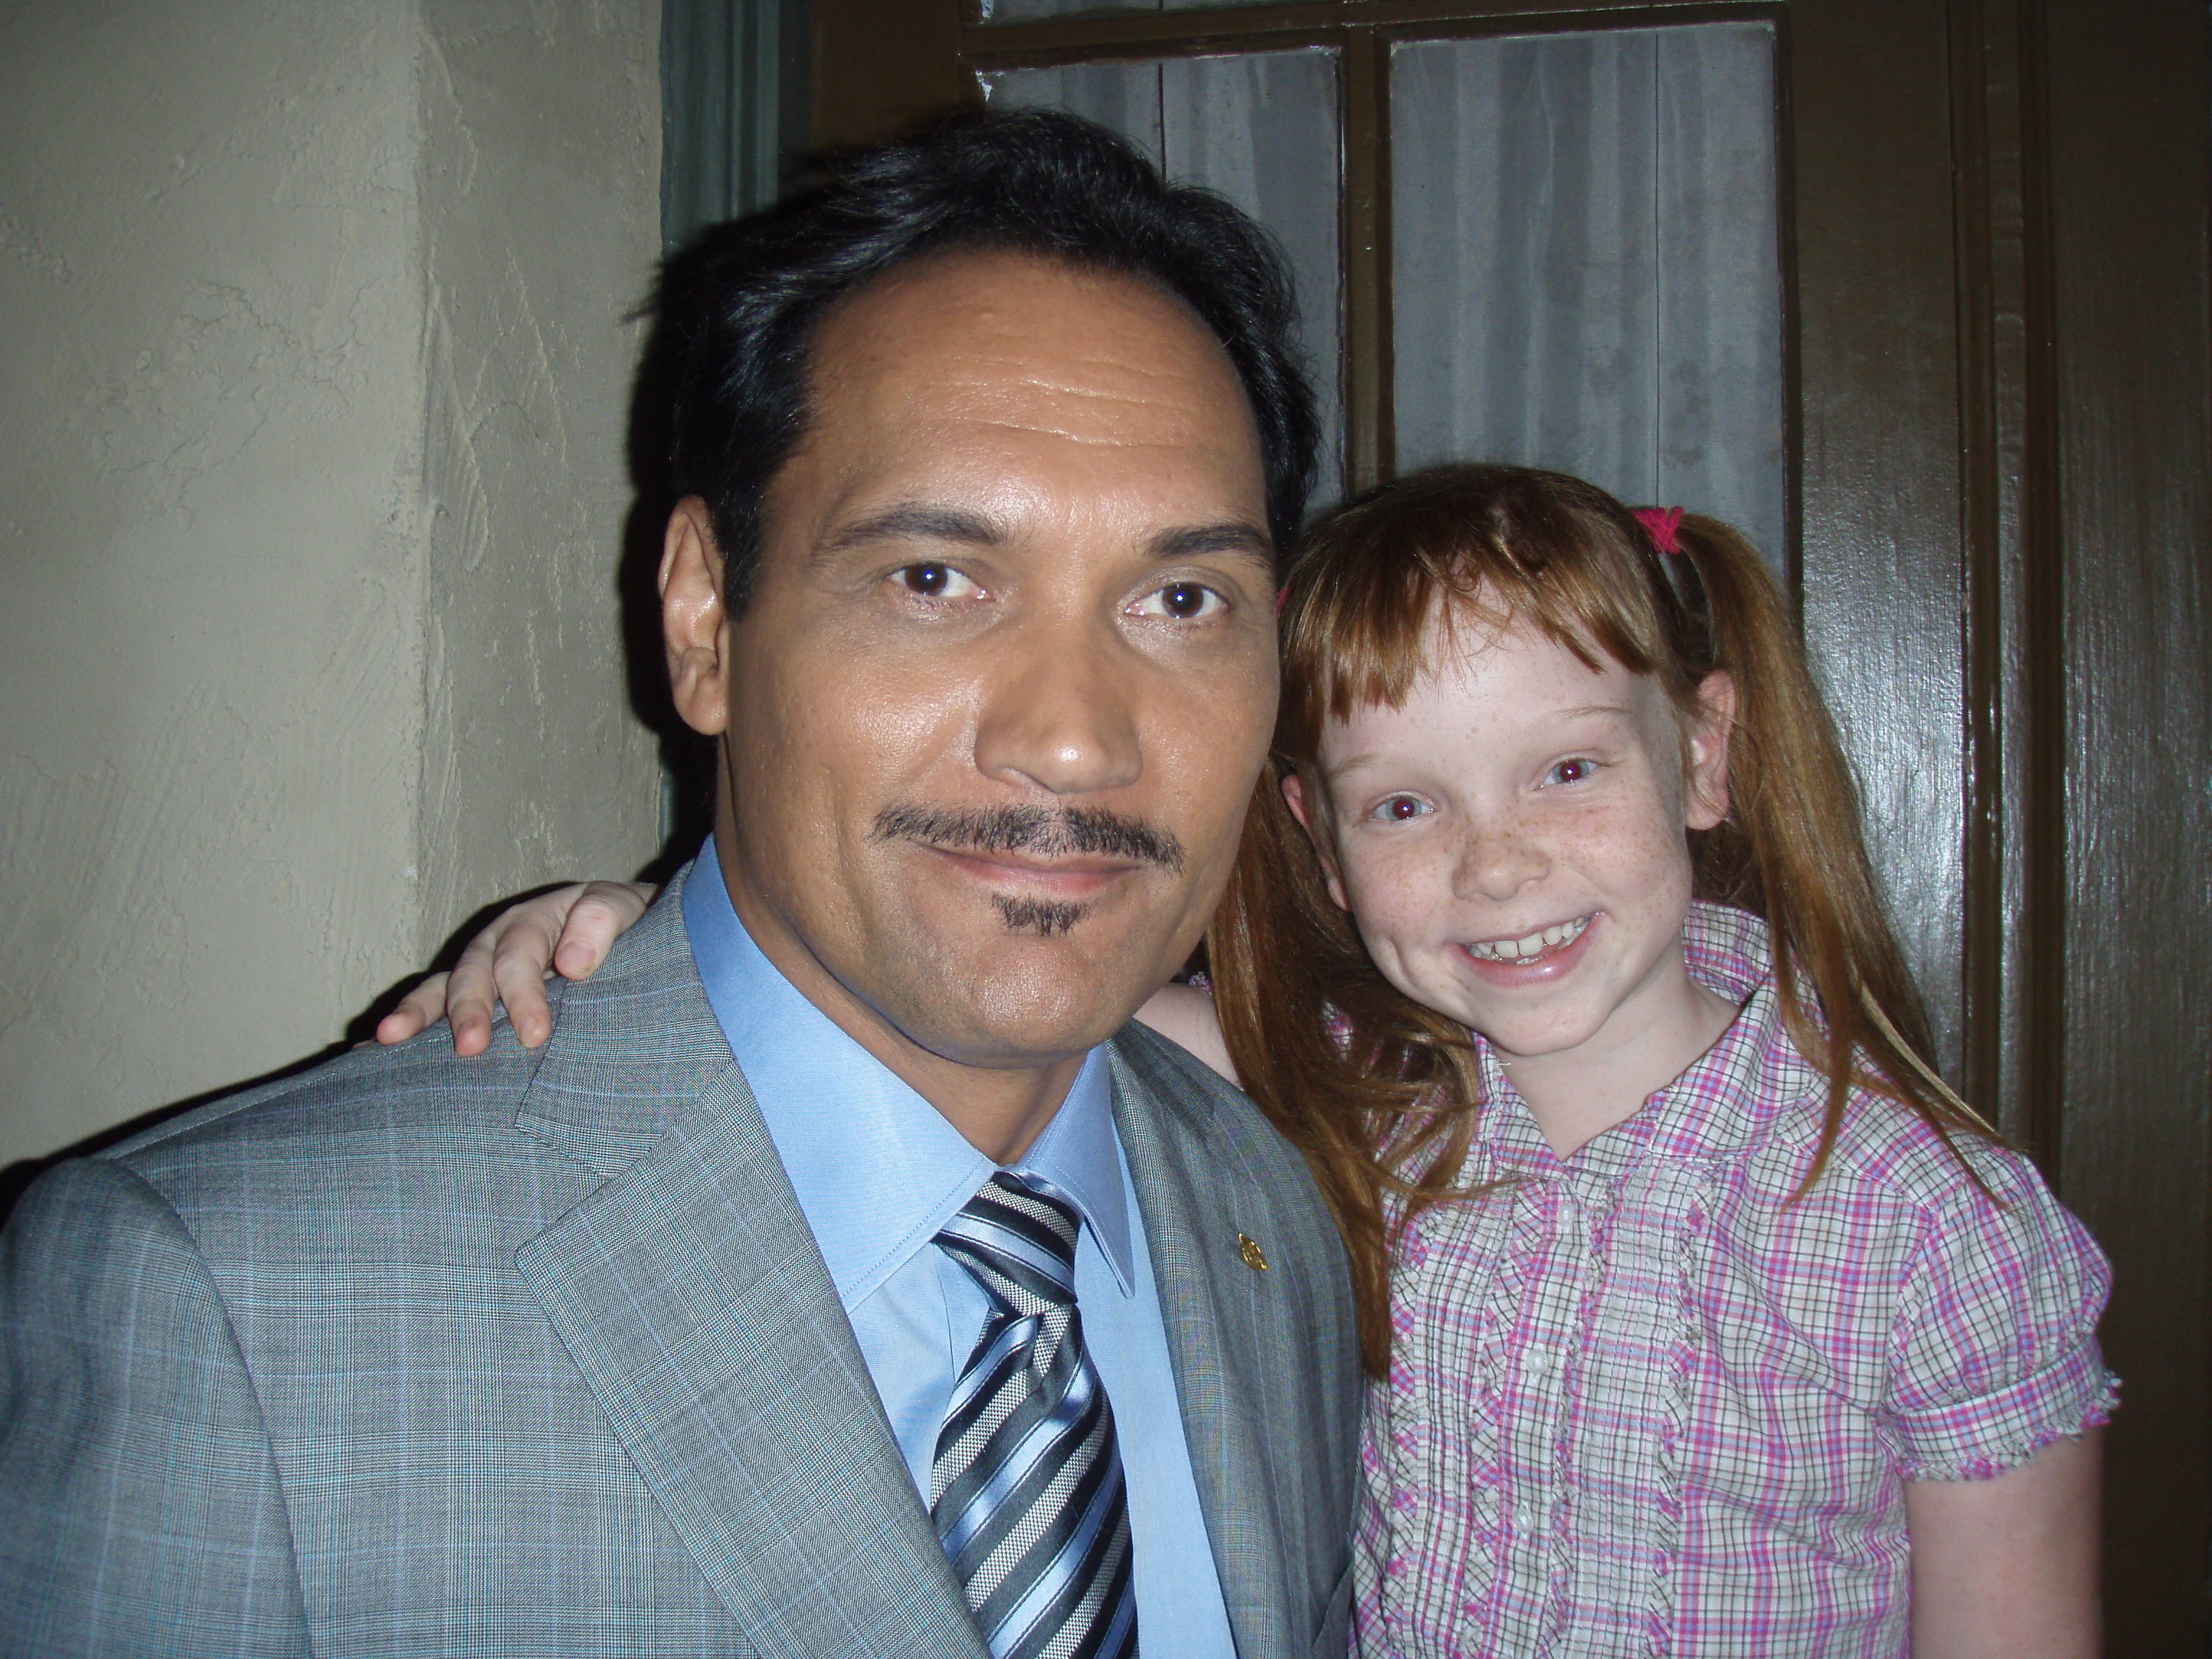 Kaleigh with Jimmy Smits on location in Dexter